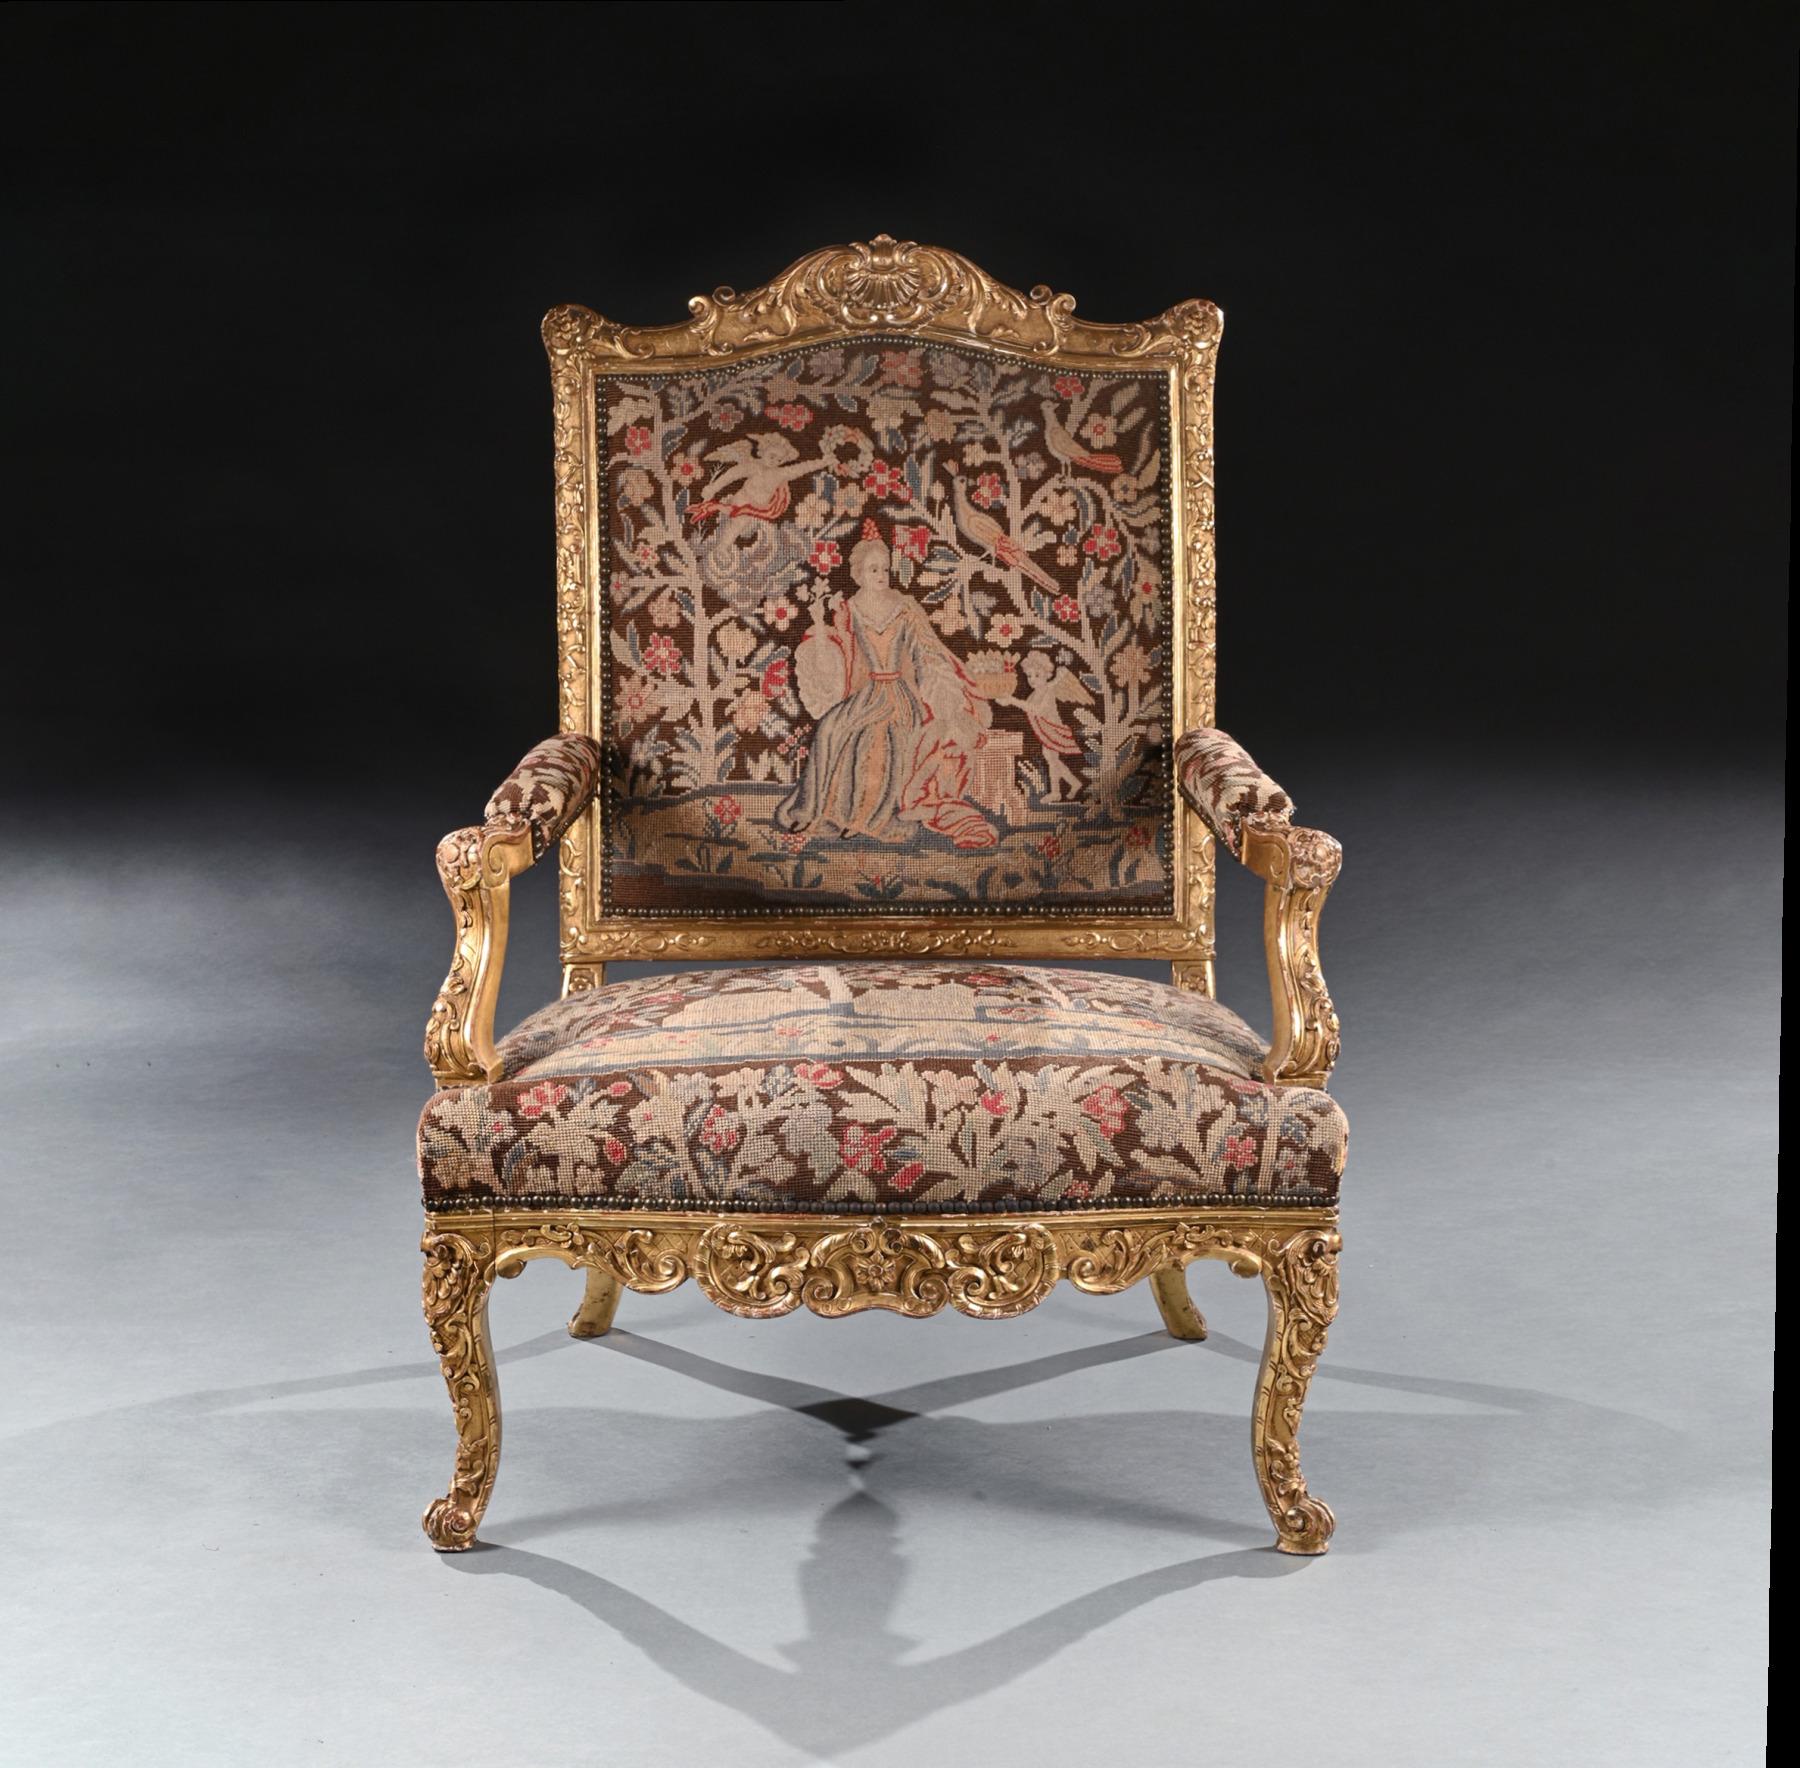 A highly impressive rare French carved Régence period giltwood fauteuil / armchair of imposing proportions with needlework upholstery.

French - circa 1715

Of grand scale, this wonderfully drawn armchair has a shaped and arched carved cresting